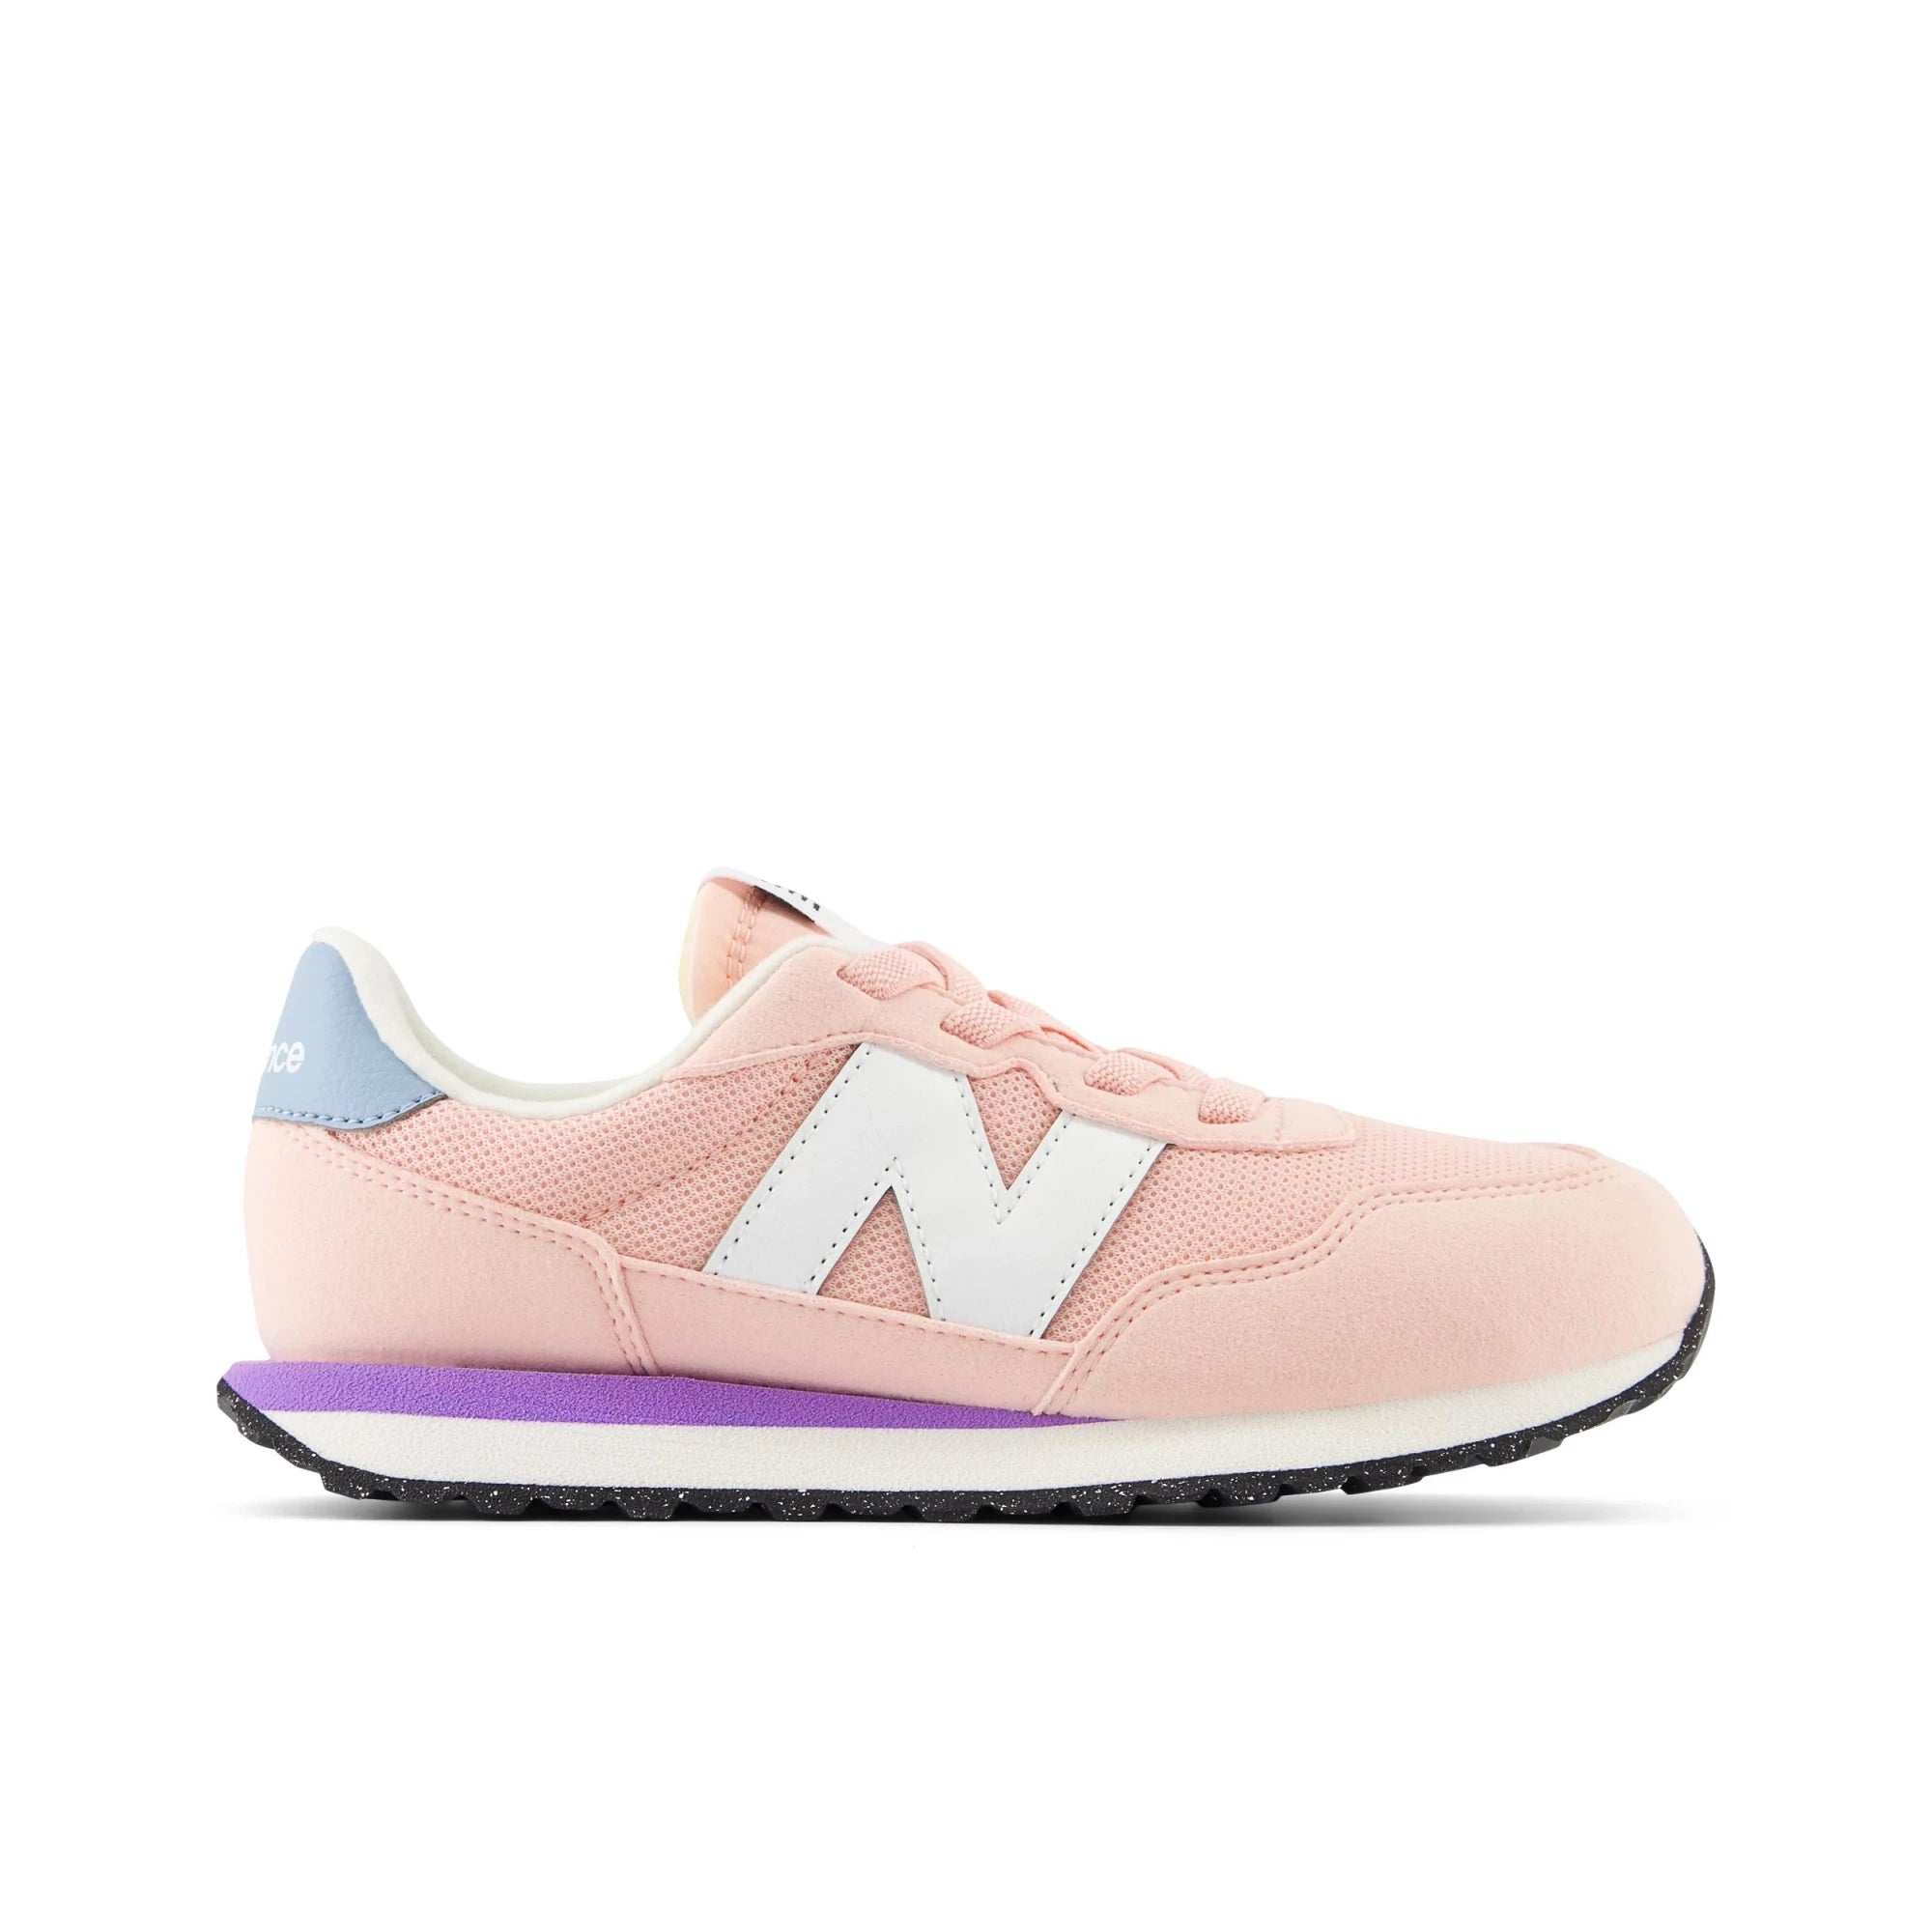 New Balance - 237 Bungee Sneakers